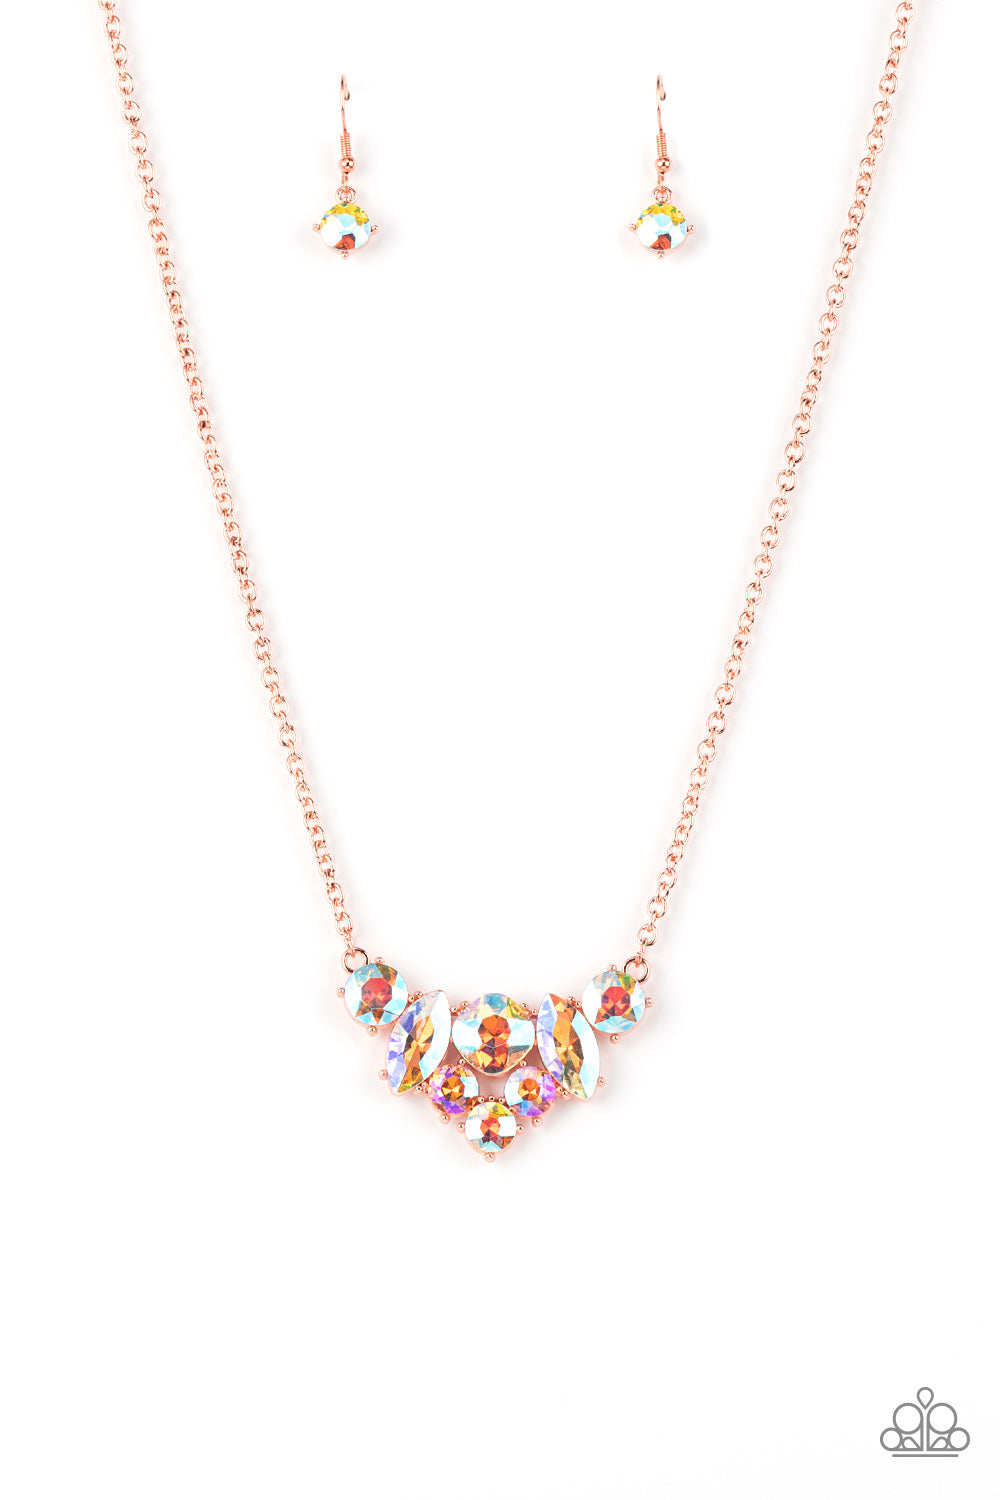 Lavishly Loaded - Copper Necklace Set October 2021 Life of the Party Exclusive - Princess Glam Shop